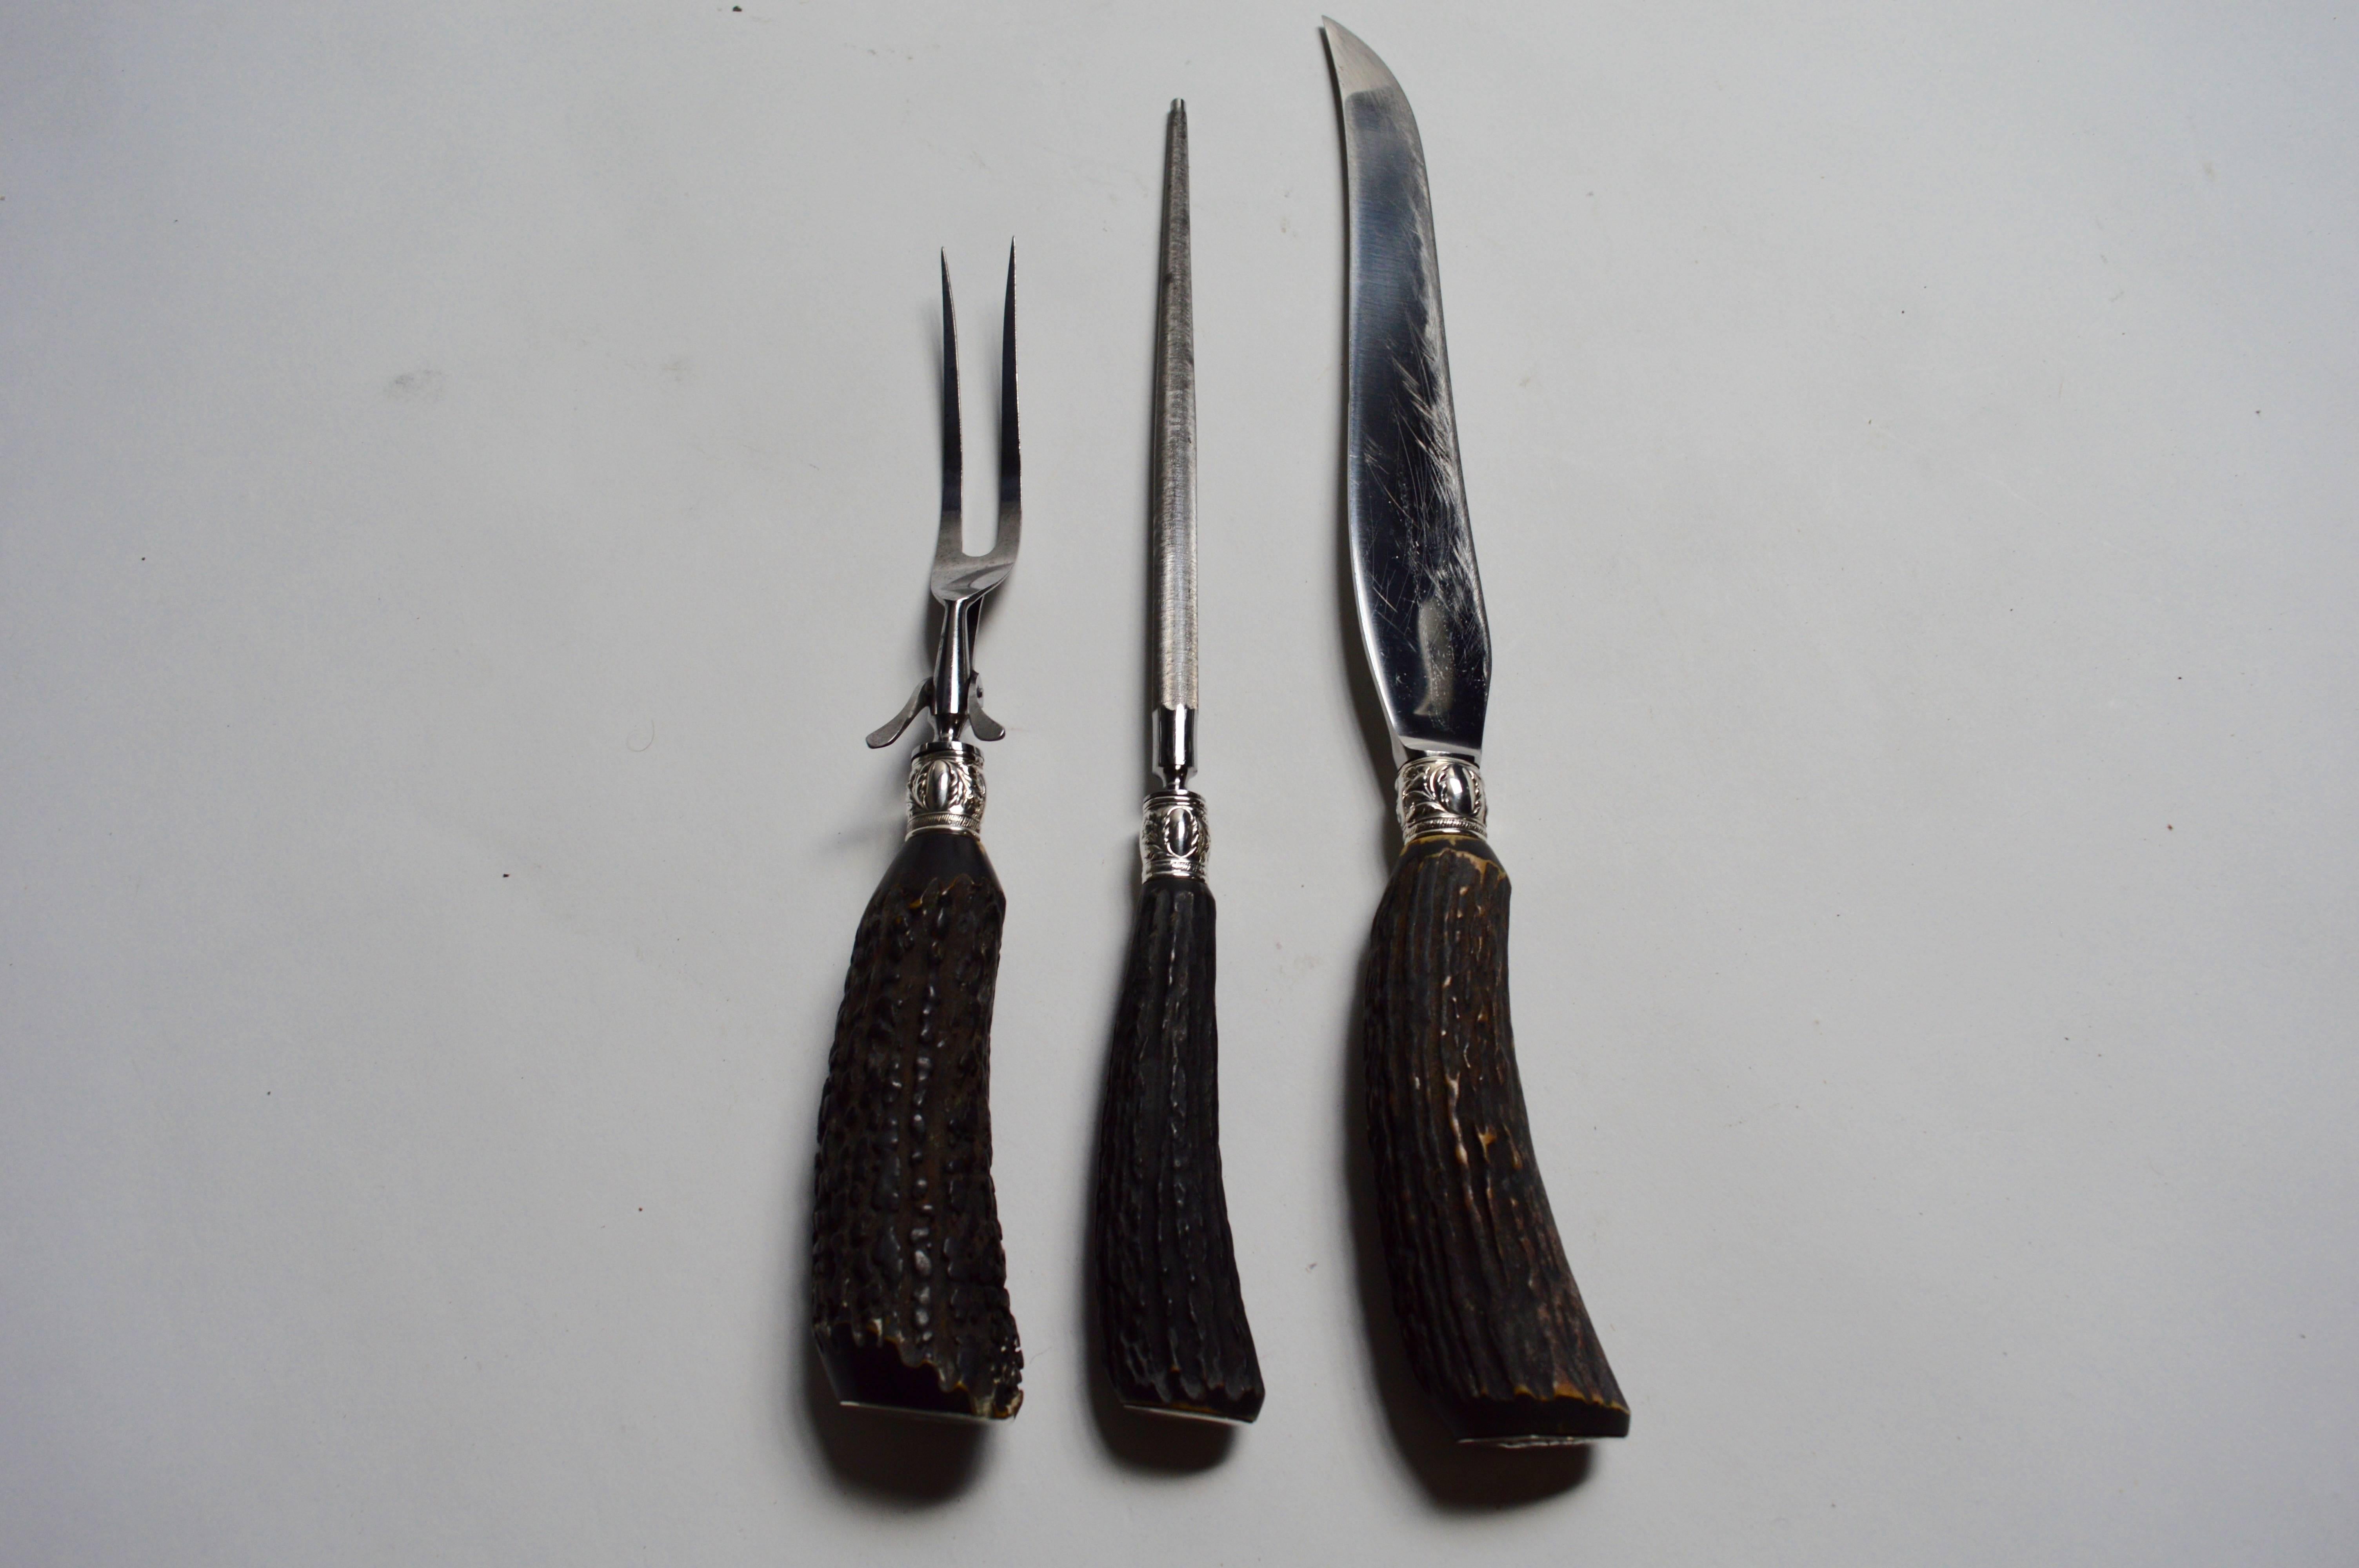 Rustic German cutler set with horn handles and steel hardware. Sterling silver tabs at the end of each handle and on the underside of each piece. Set includes blade, blade sharpener and fork. Unique set. Excellent vintage condition.